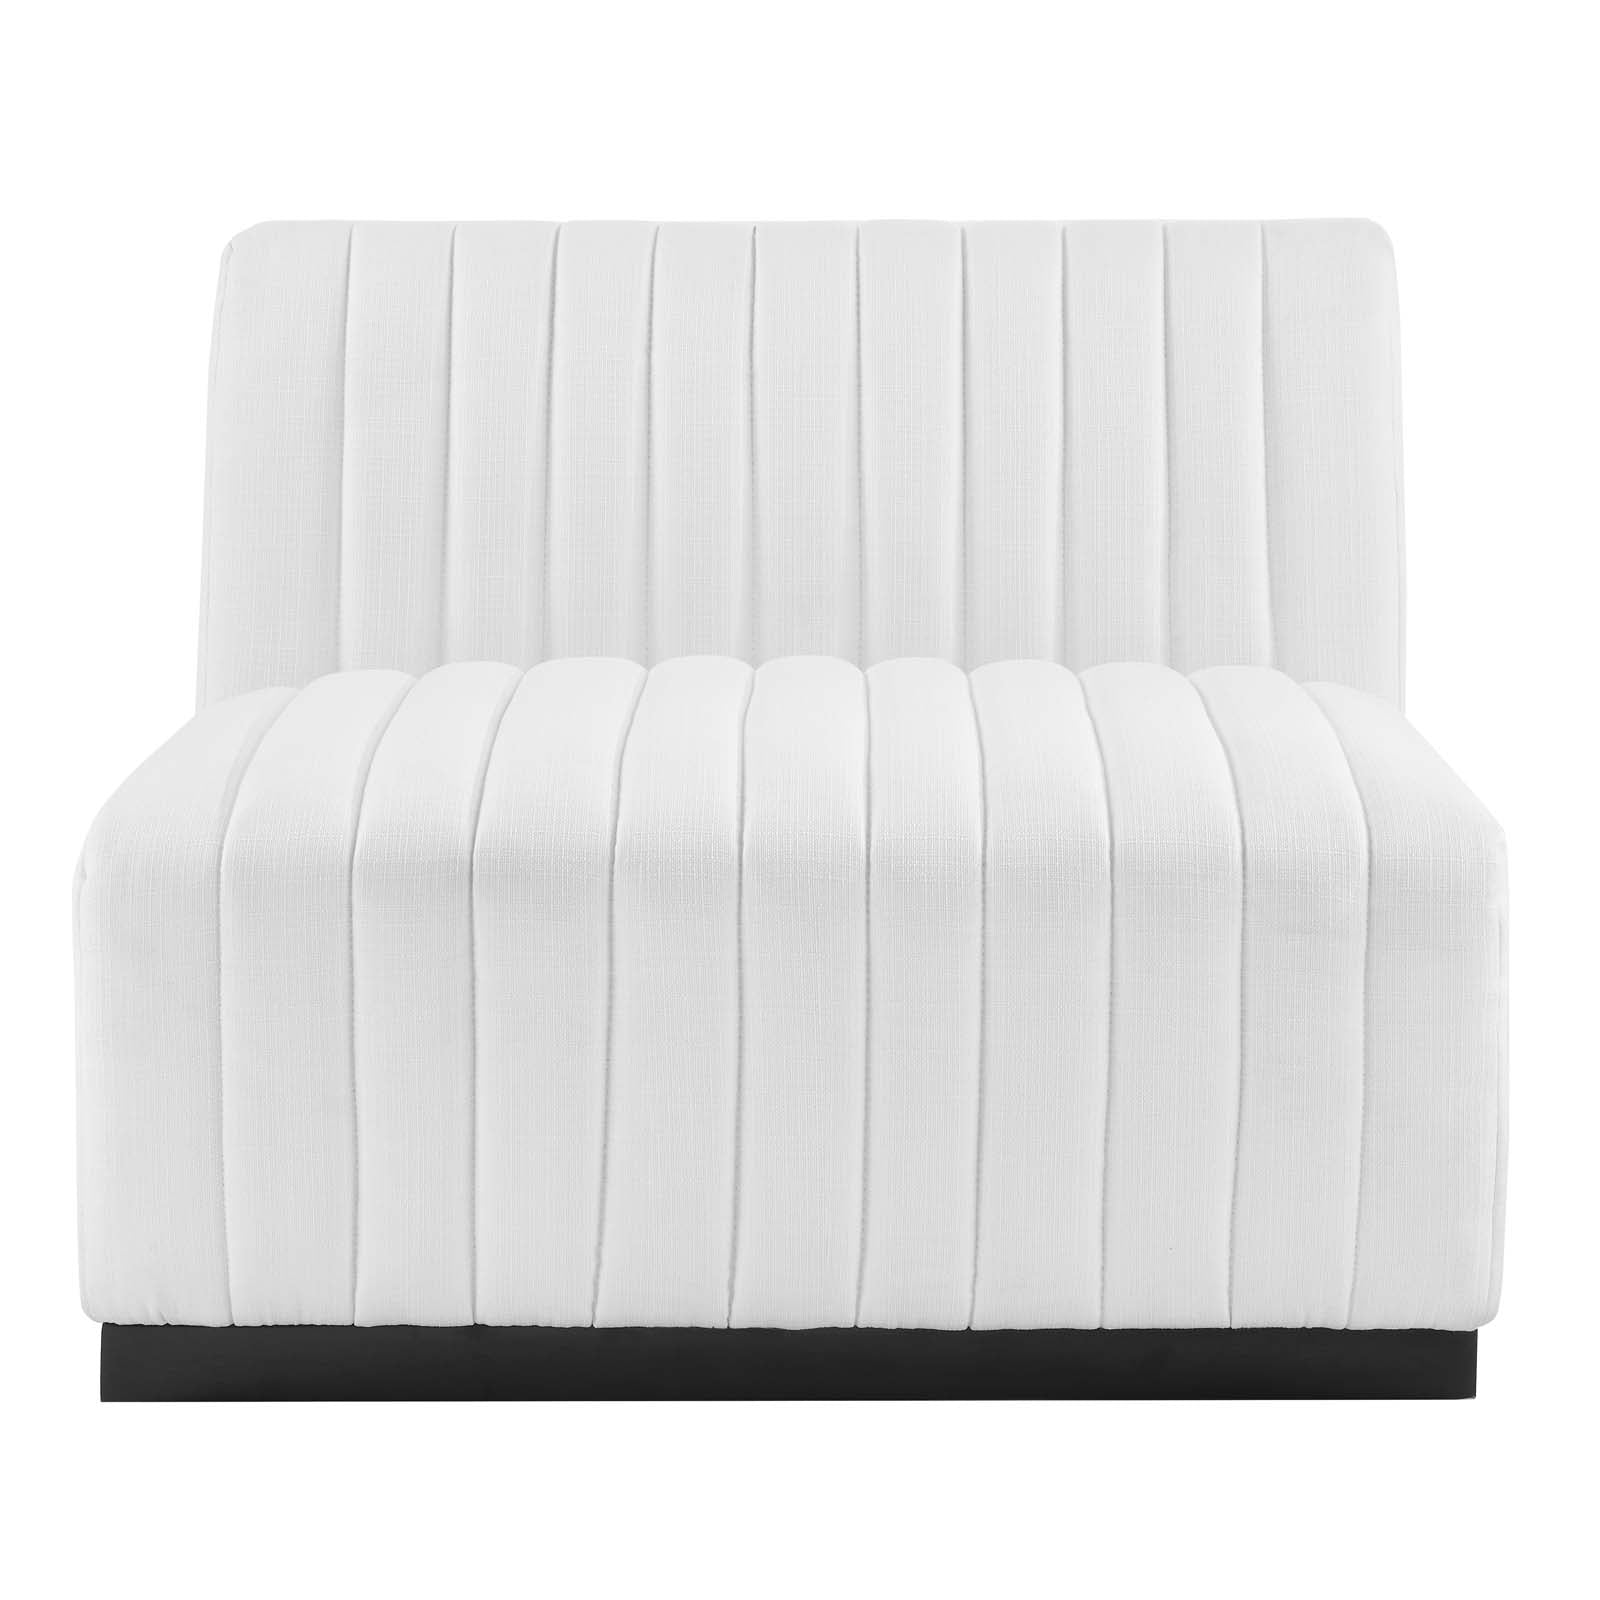 Modway Accent Chairs - Conjure Channel Tufted Upholstered Fabric Armless Chair Black White